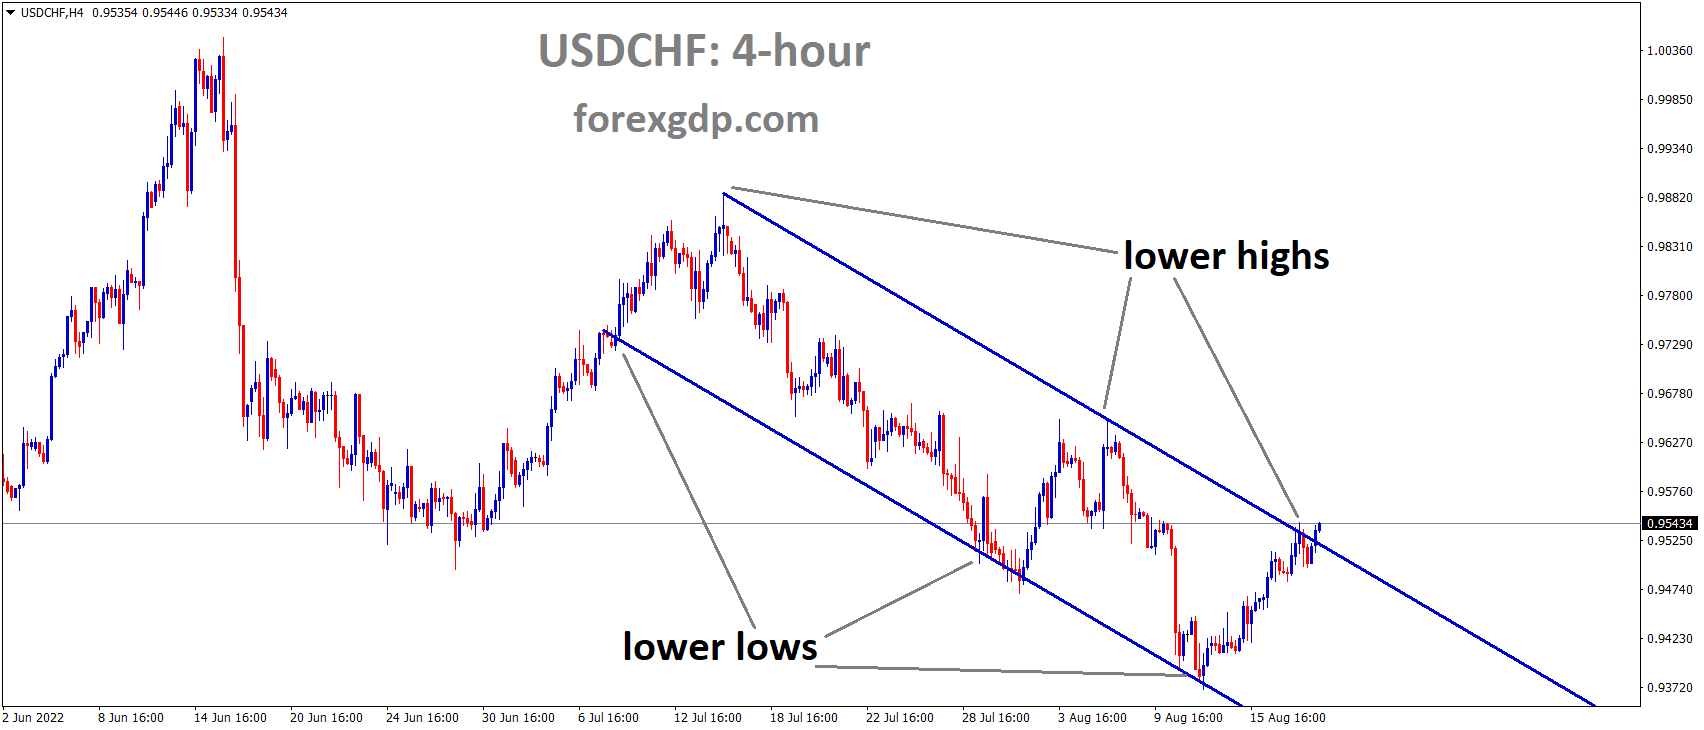 USDCHF is moving in the Descending channel and the Market has reached the Lower high area of the channel 1